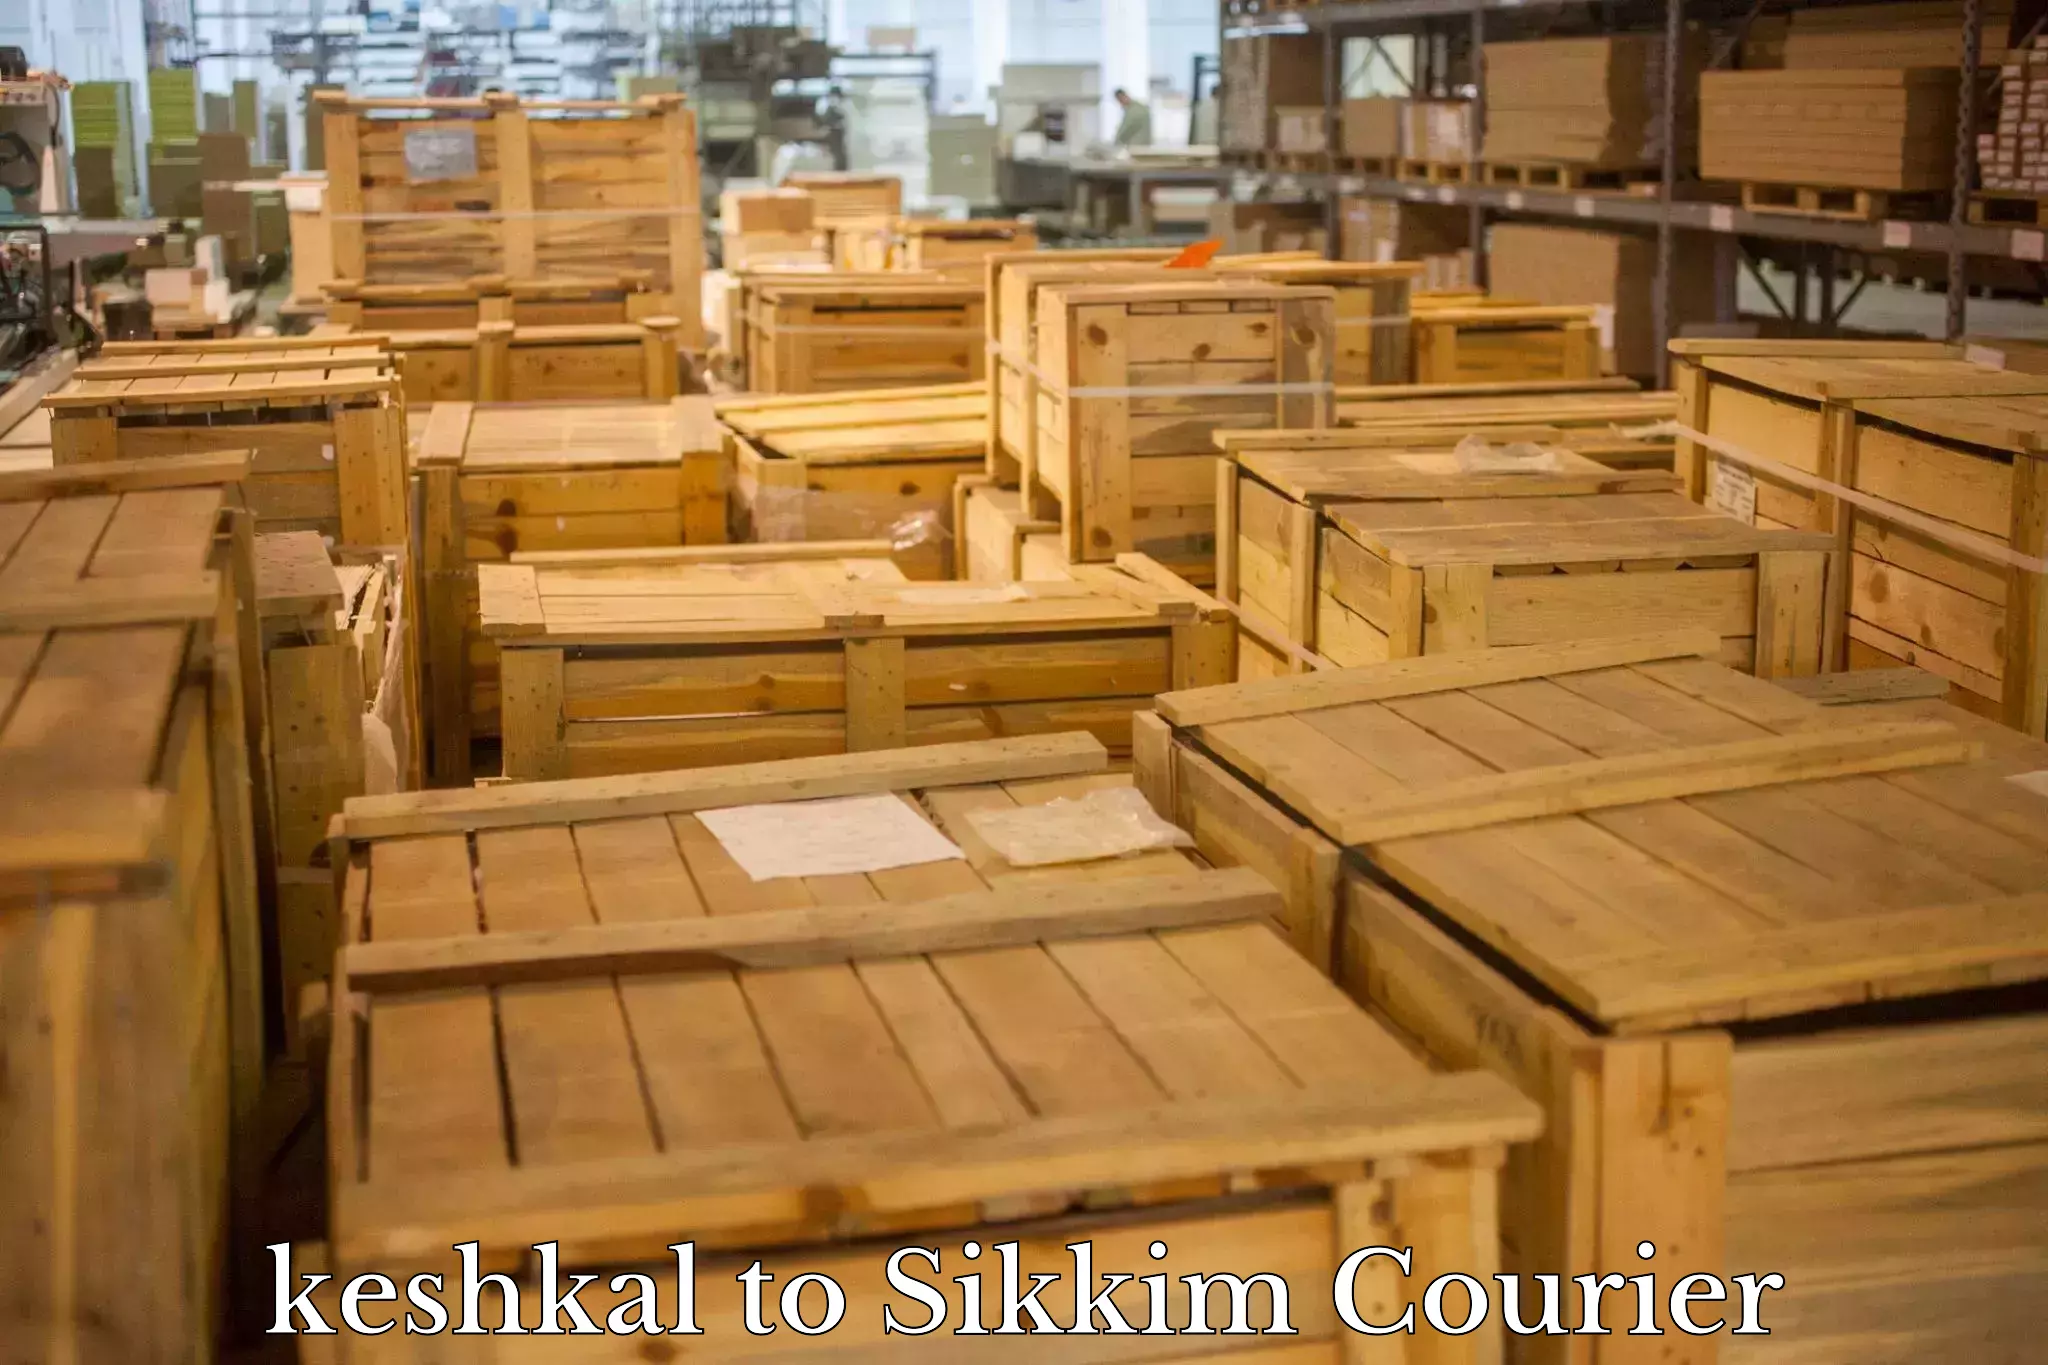 Ocean freight courier keshkal to South Sikkim